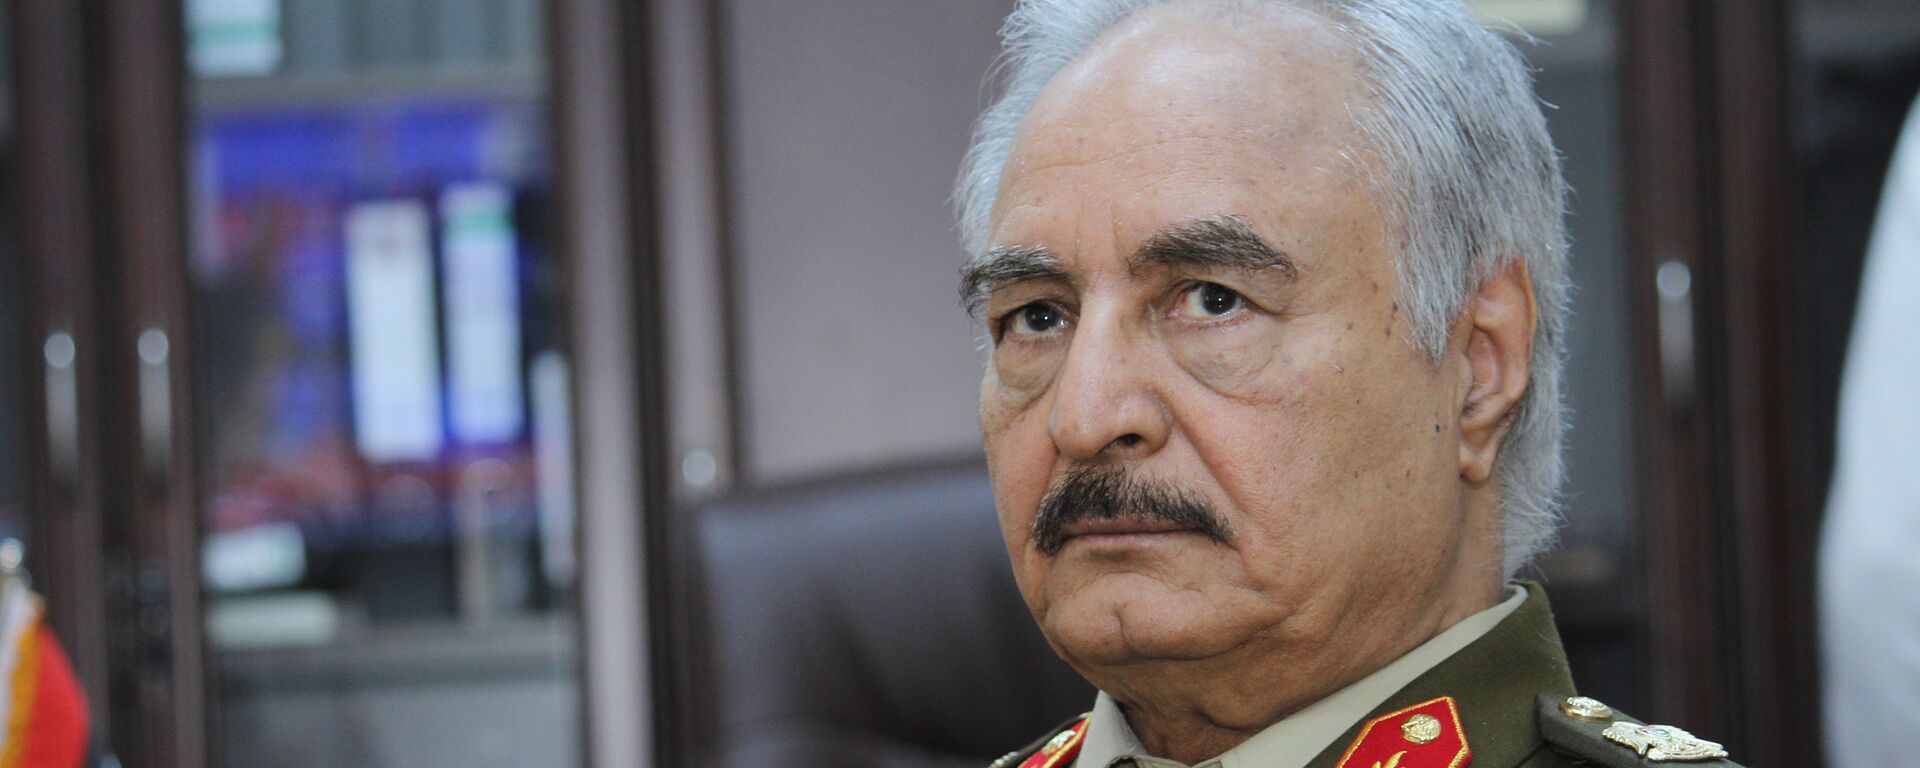 In this March 18, 2015 file photo, Gen. Khalifa Haftar, then Libya's top army chief, speaks during an interview with the Associated Press in al-Marj, Libya.  - Sputnik International, 1920, 16.11.2021